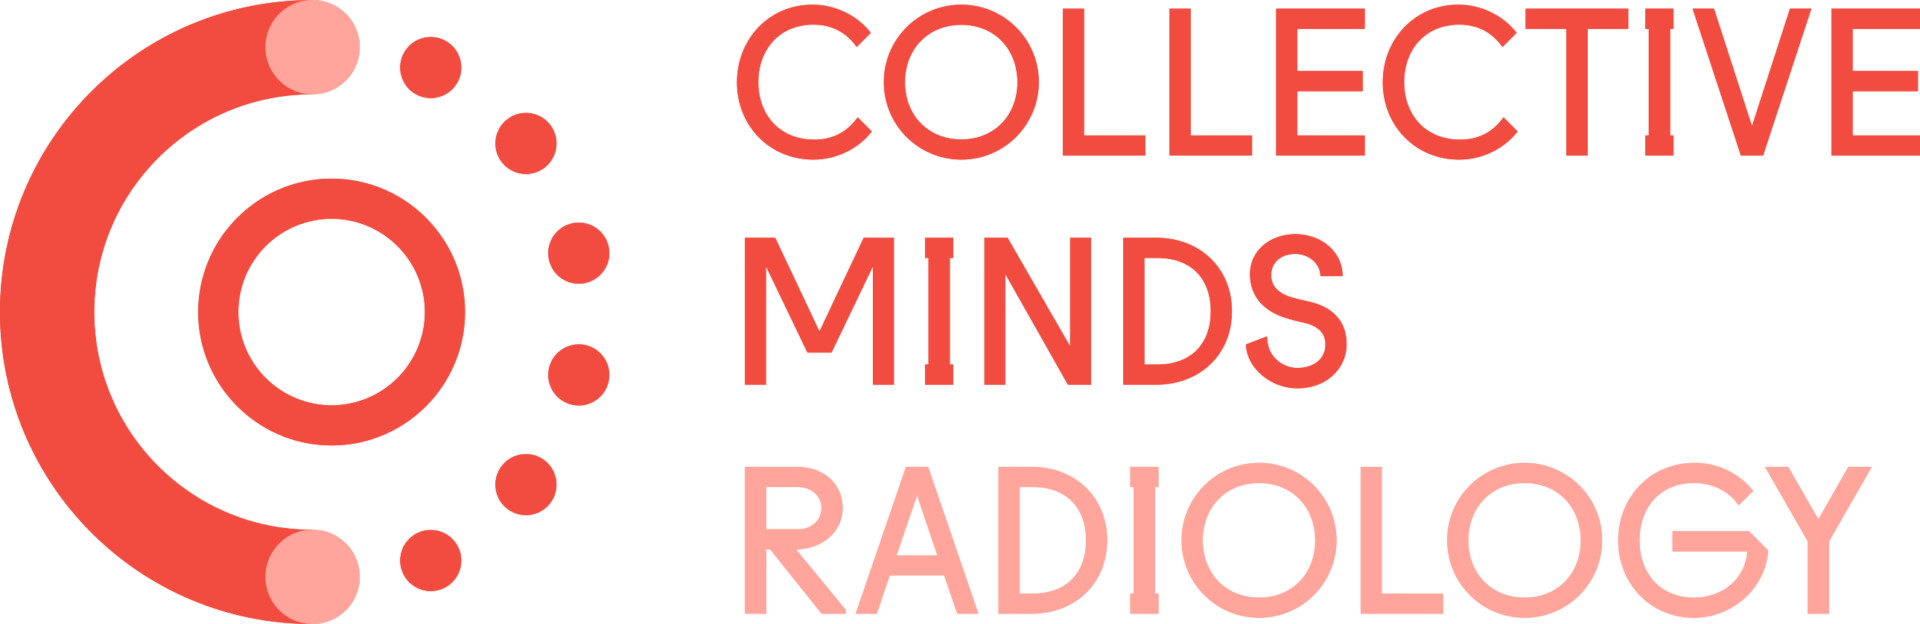 Collective Minds Radiology